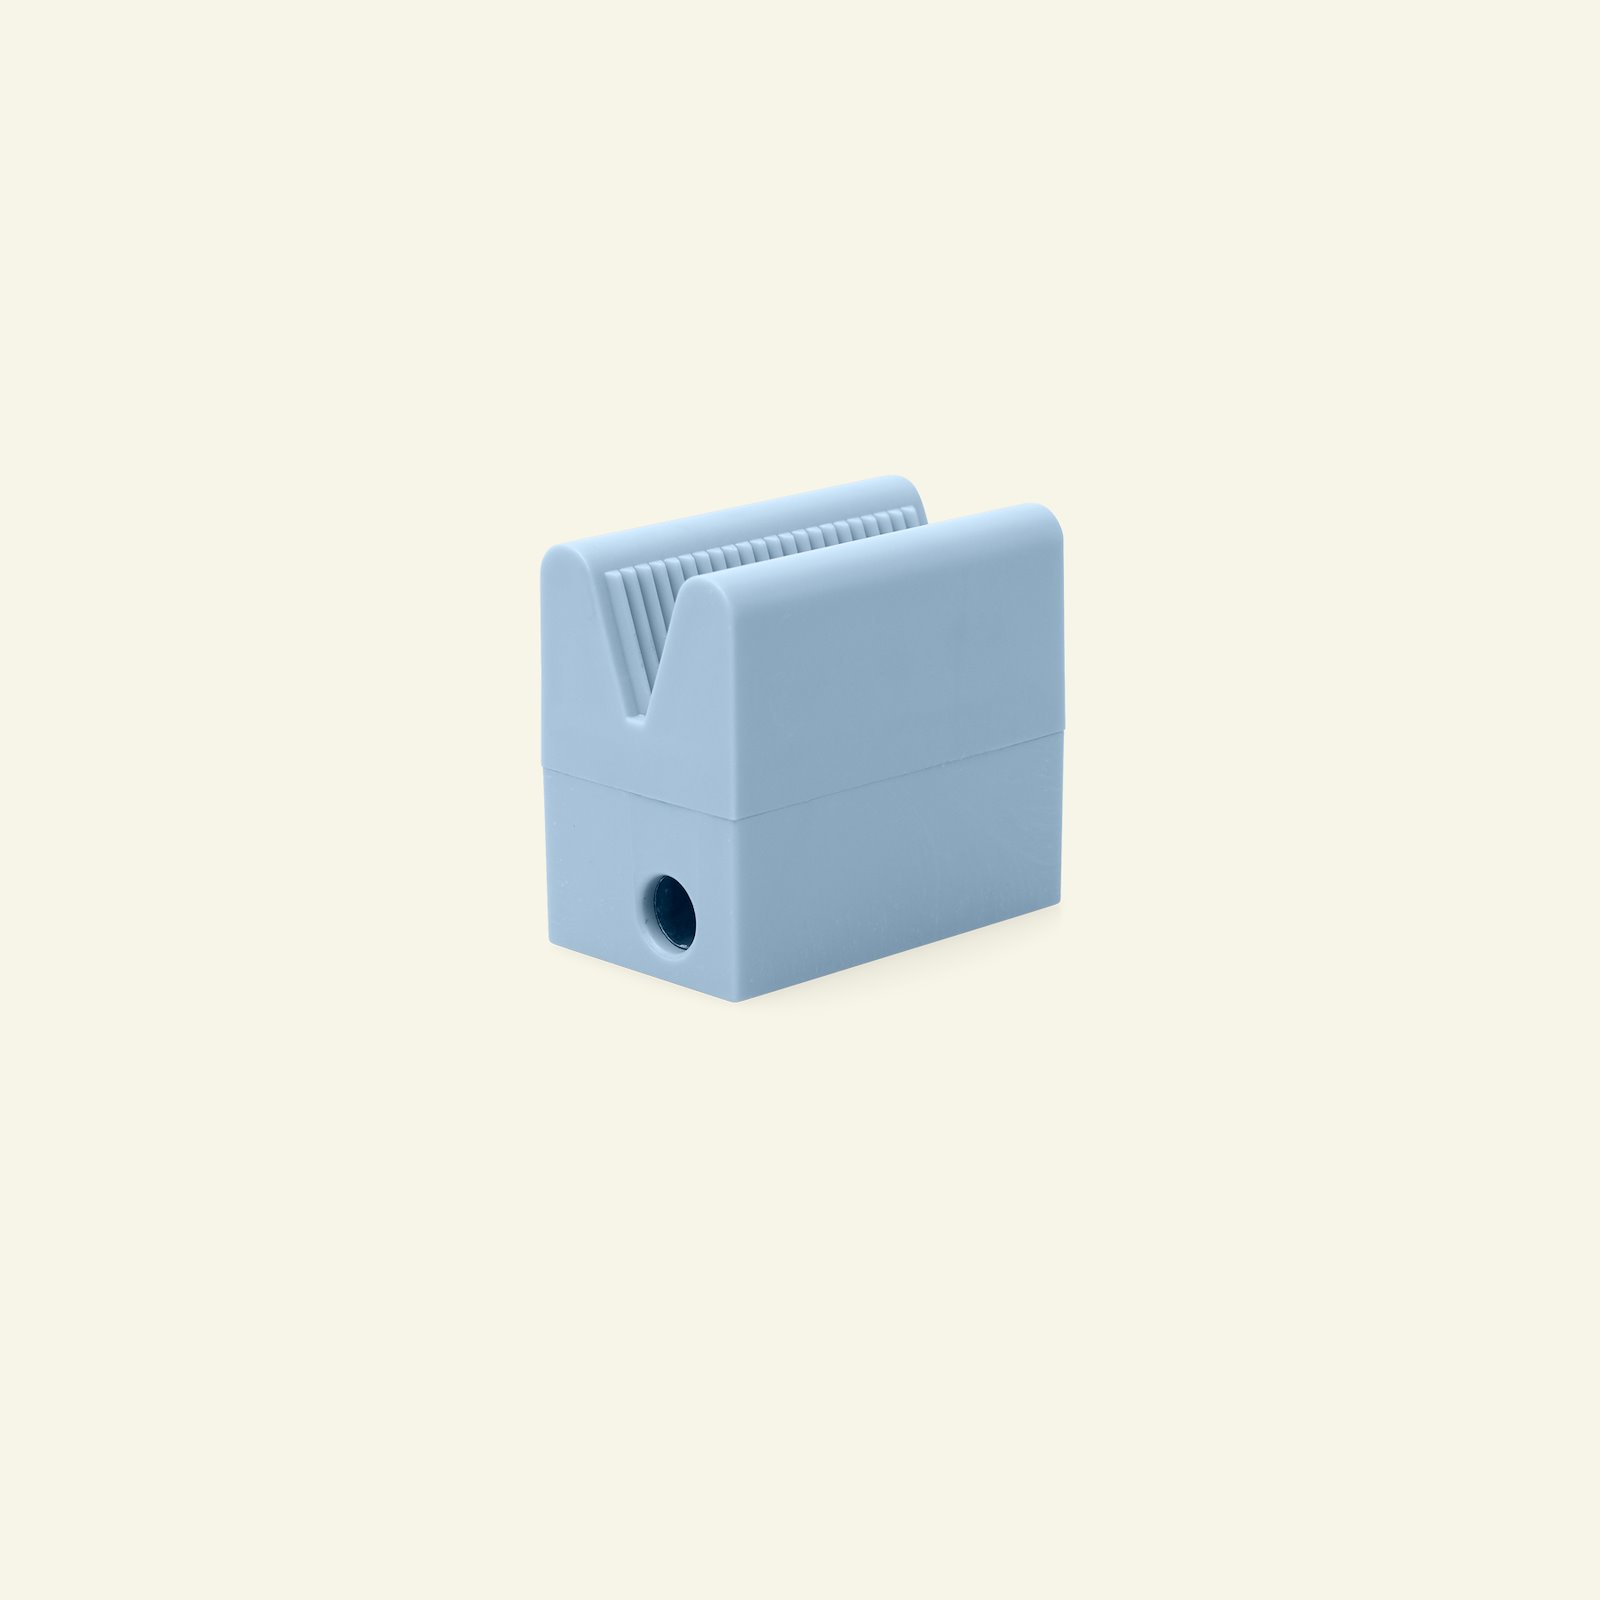 Chalk and pencil sharpener 50x30x30mm 41007_pack